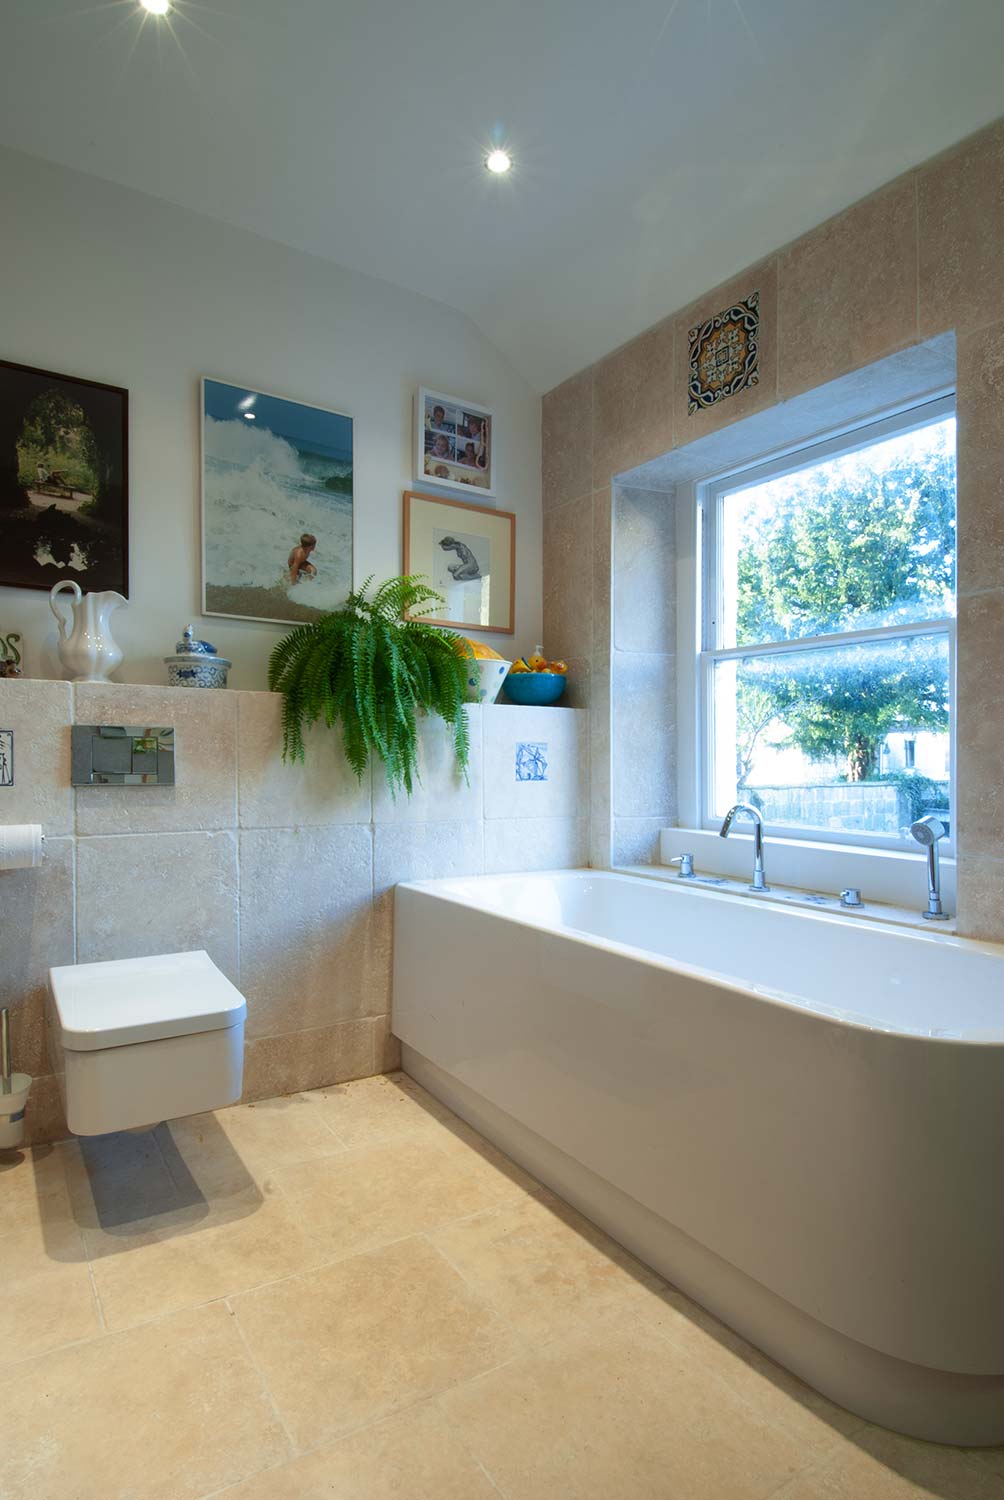 A real bathroom shot on location in a client's home